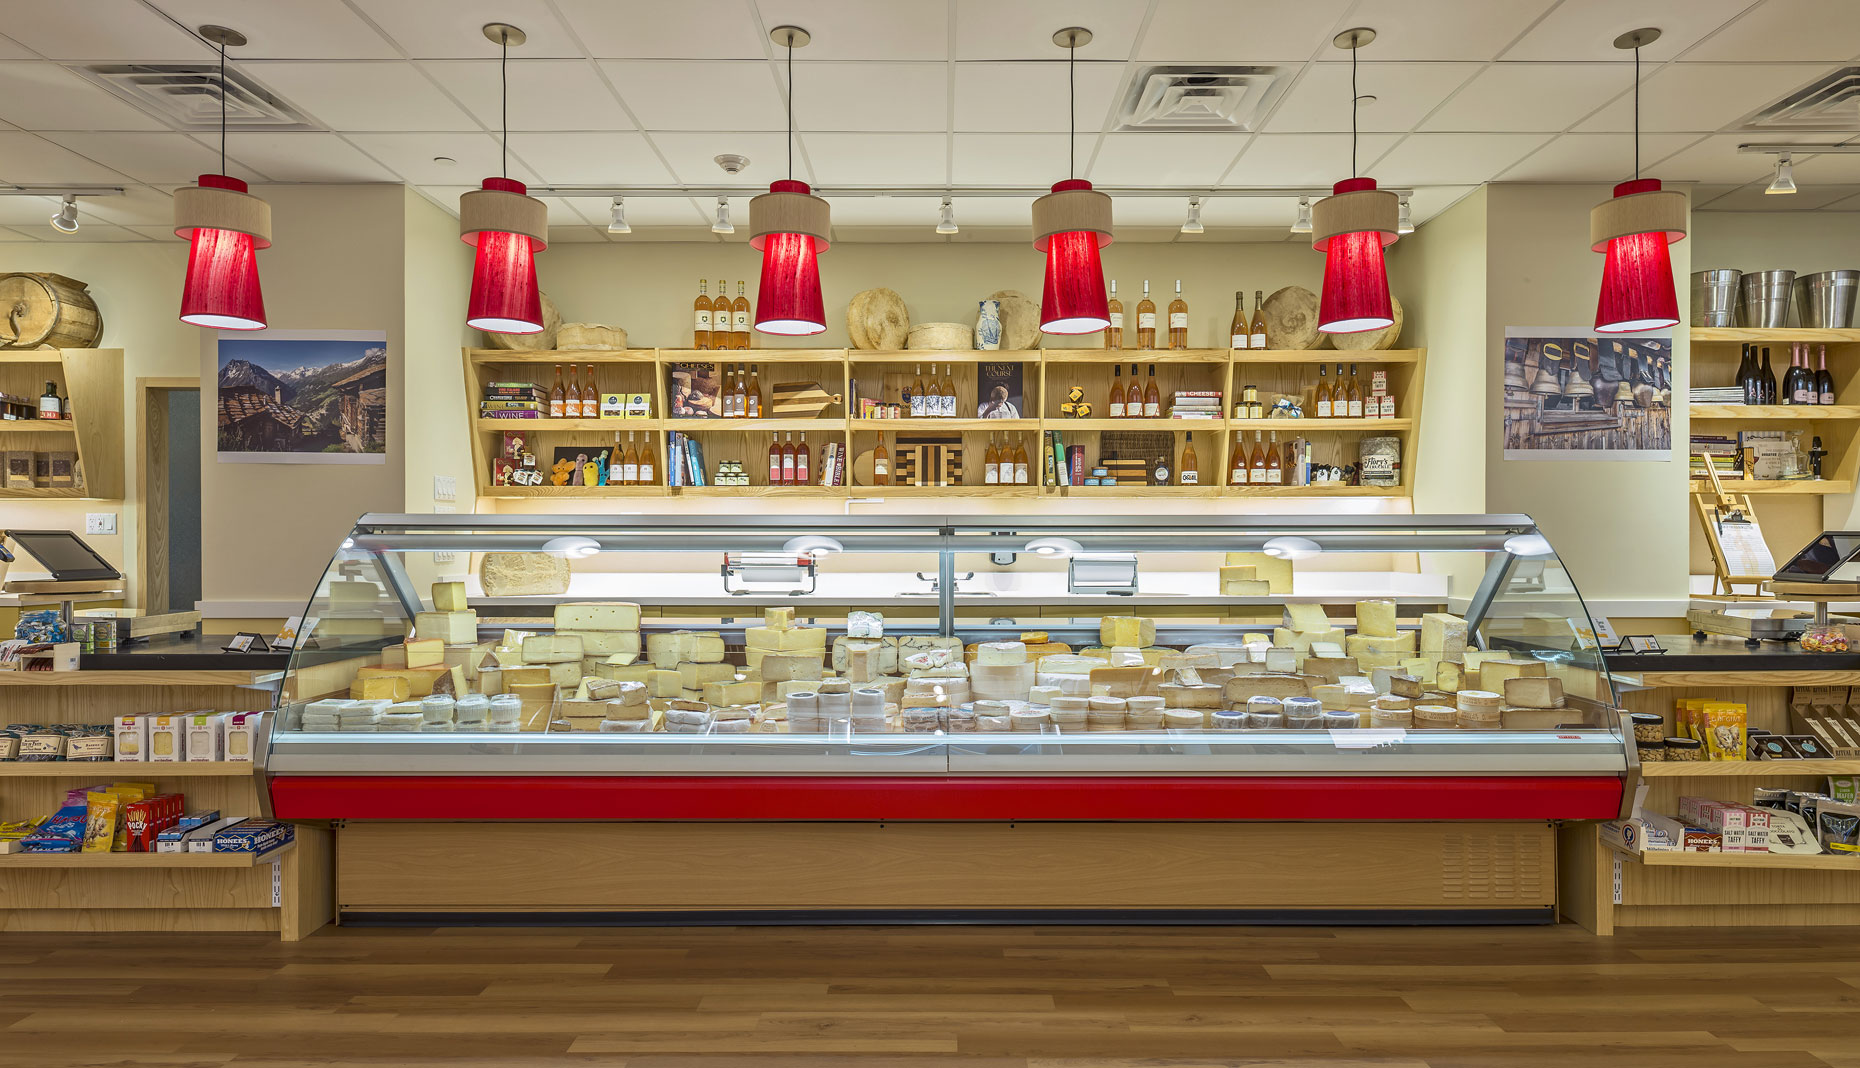 The Cheese Shop of Salem, Interior Design by Kenneth E. Hurd & Associates